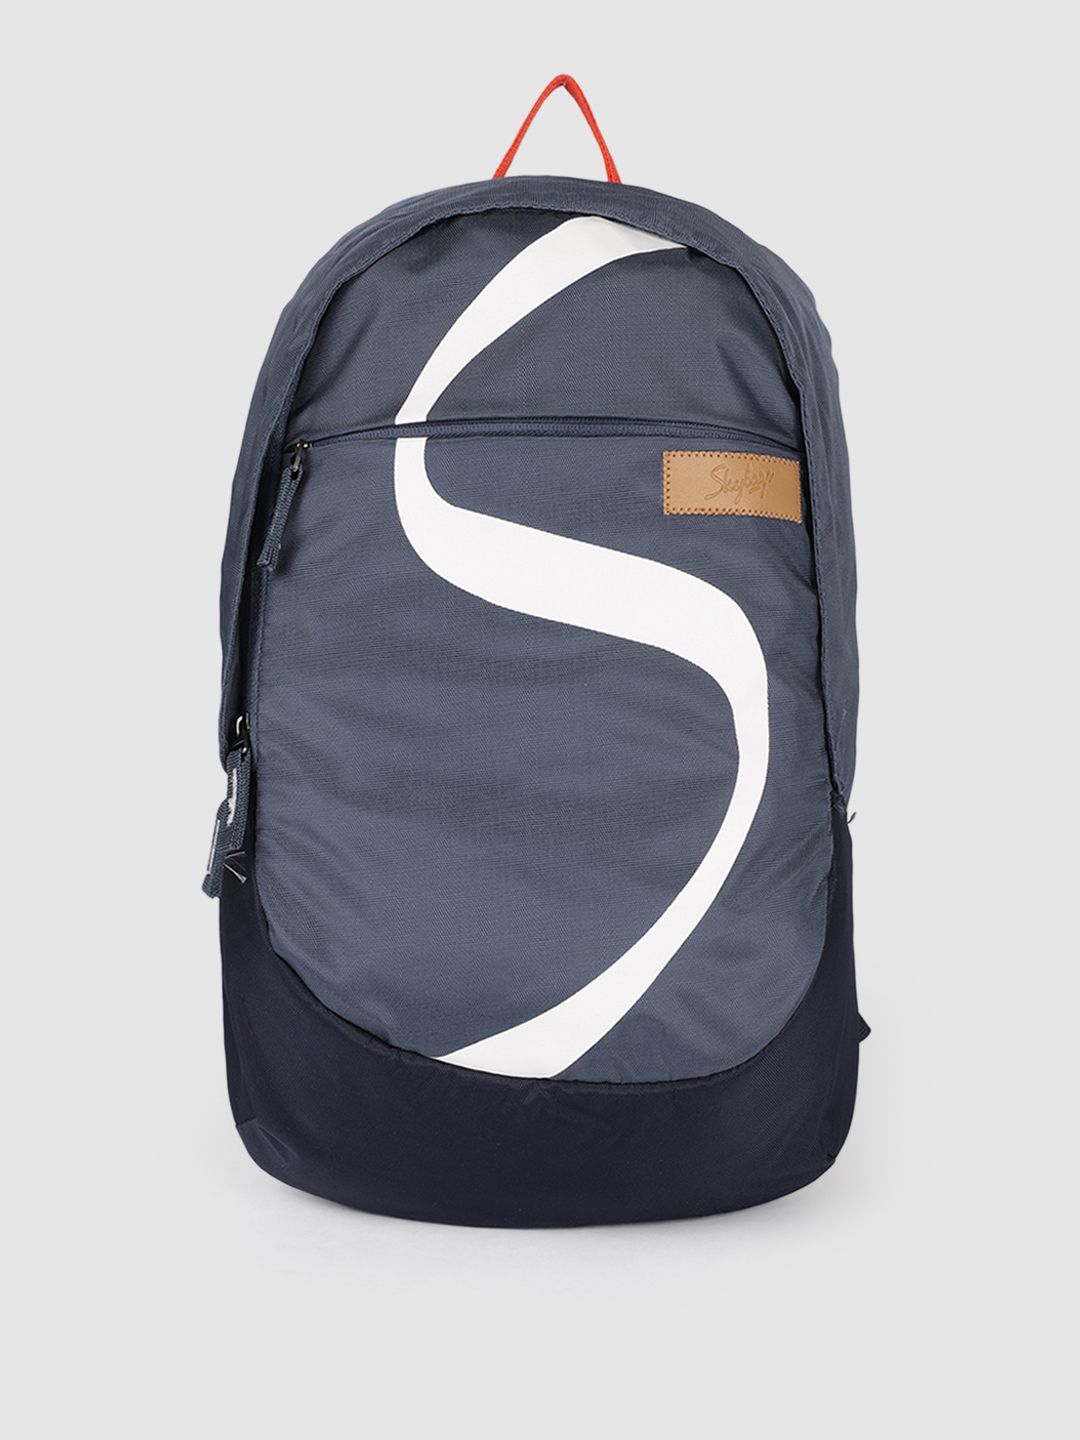 Skybags Unisex Navy Blue Brand Logo Backpack Price in India